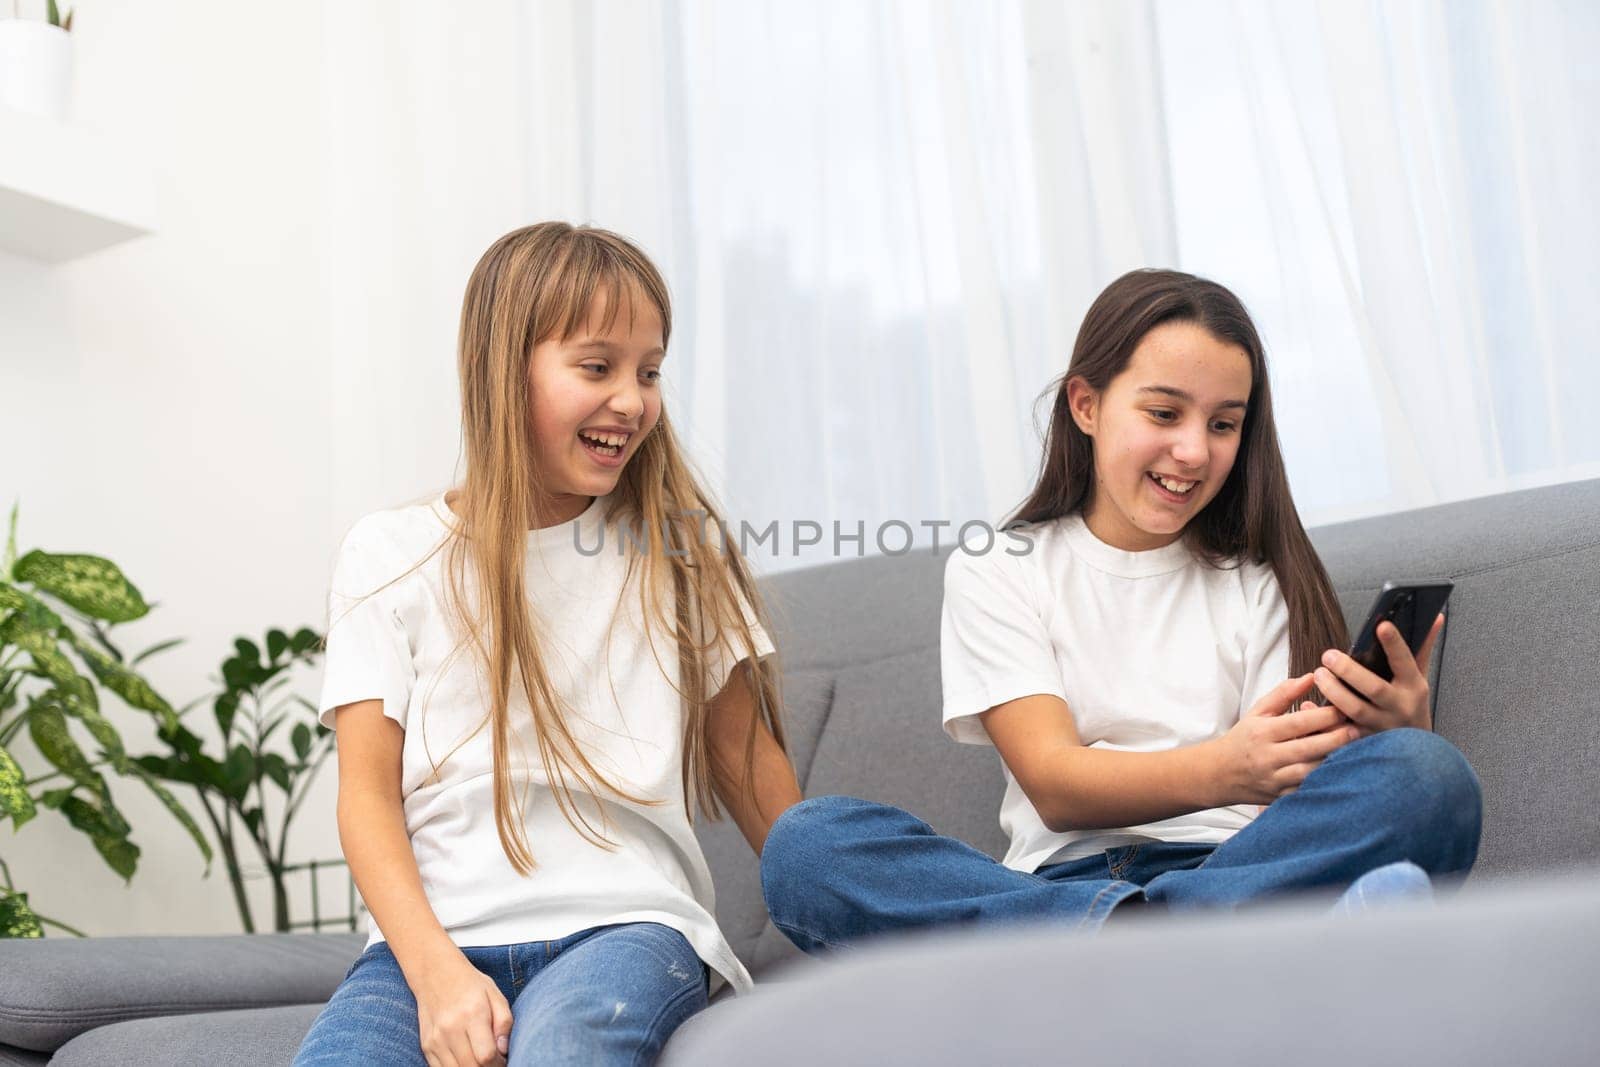 Children play with a mobile phone at home by Andelov13